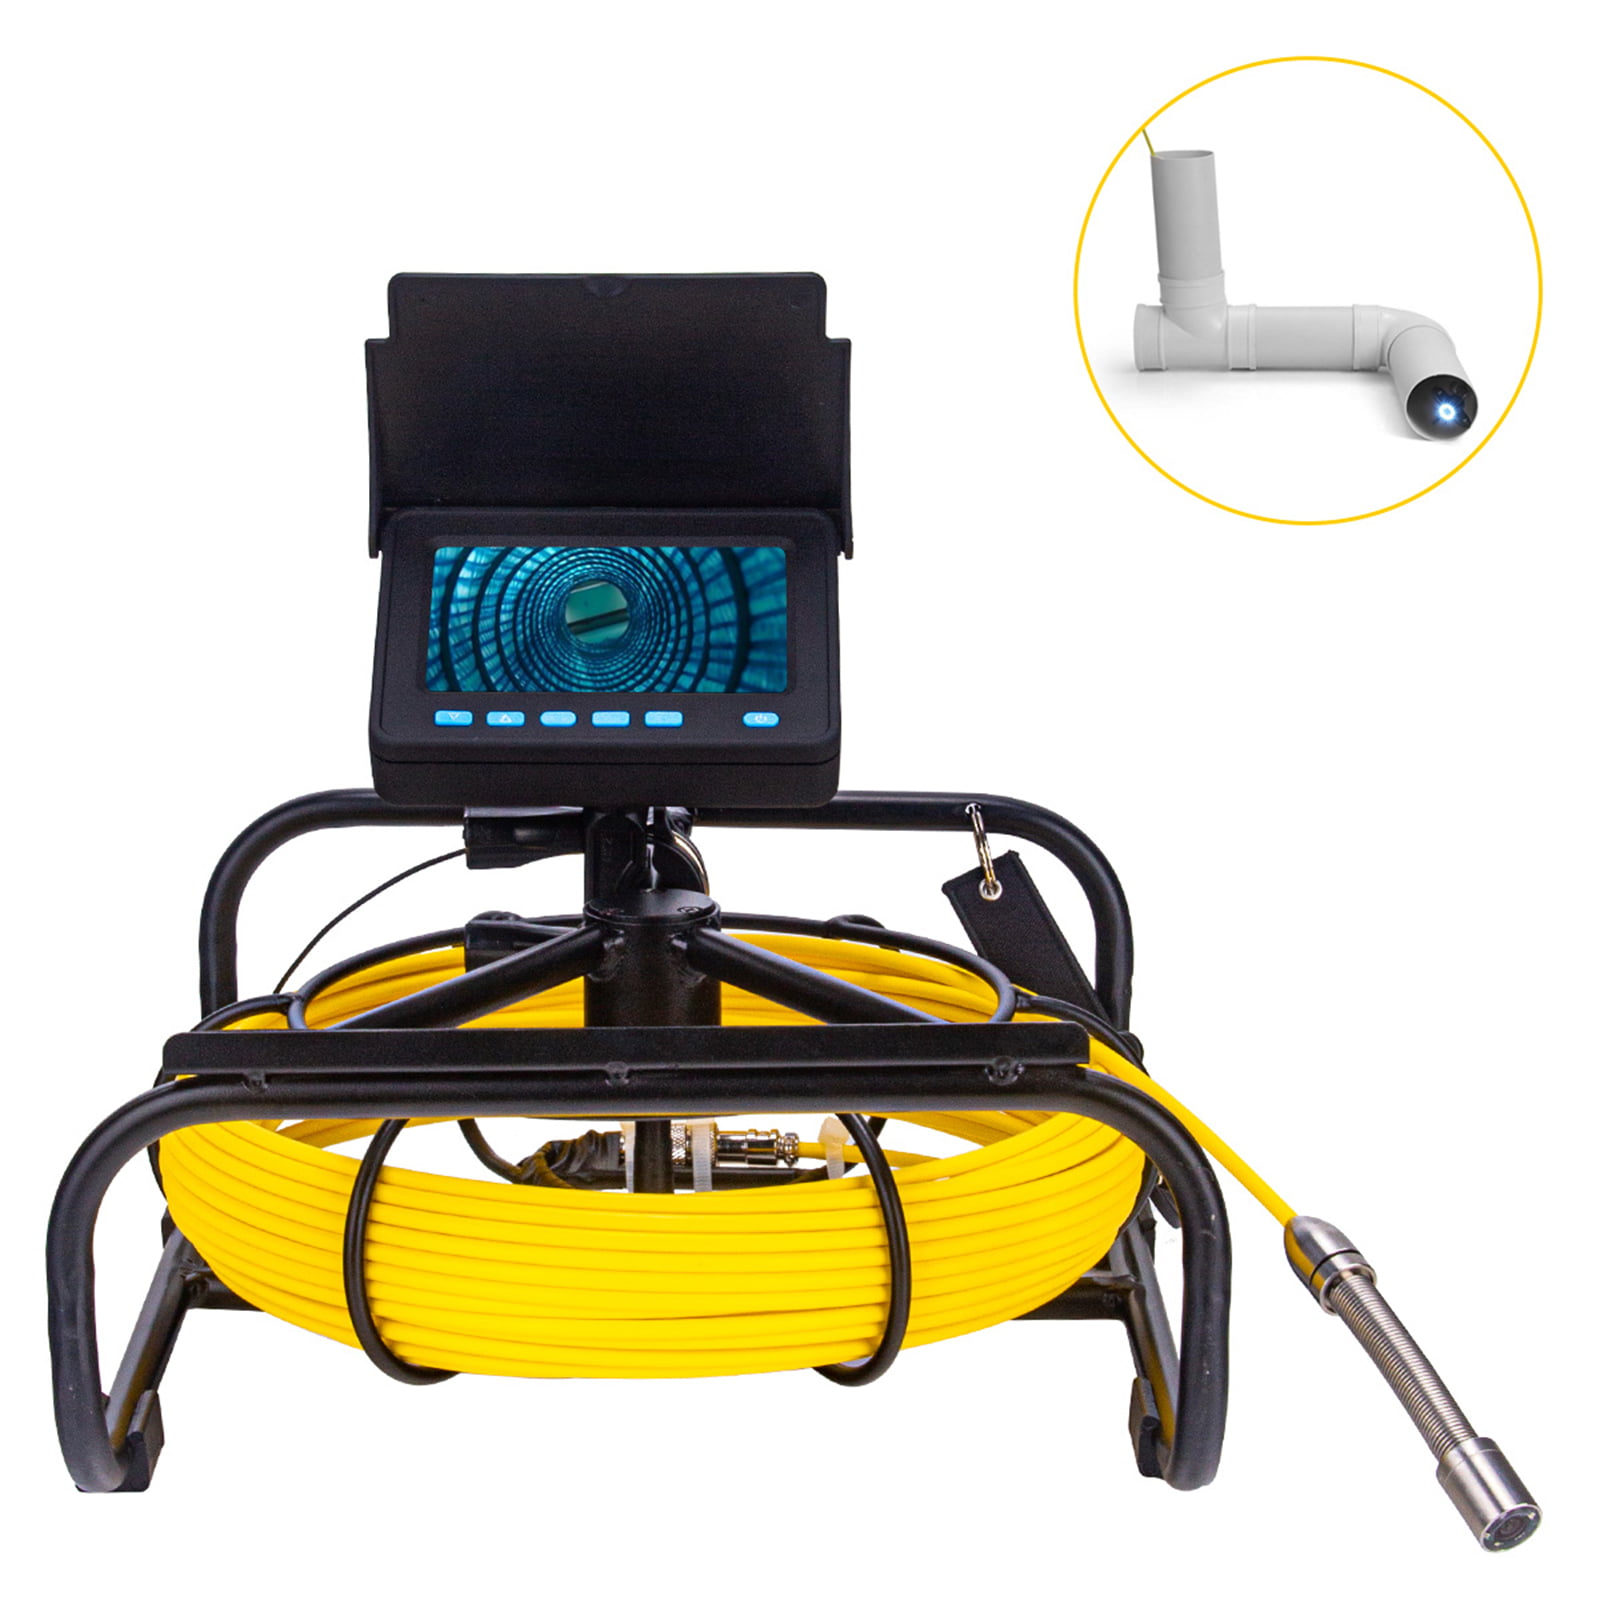 20M 4.3"LCD 17mm Handheld Industrial Pipe Sewer Inspection Video Camera 1000 TVL 